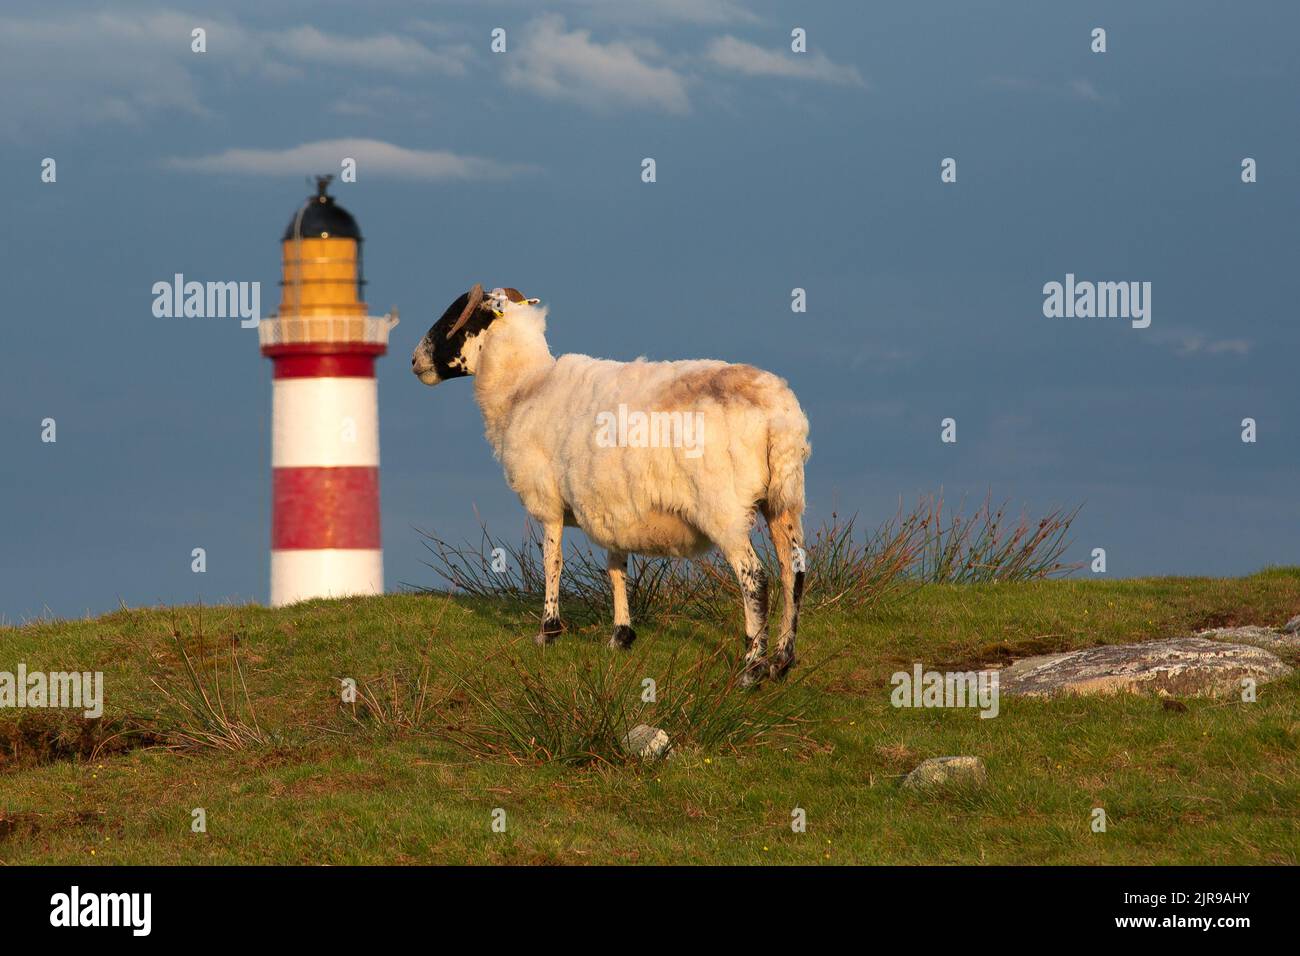 Sheep Looking at Eilean Glas Lighthouse, Scalpay, Isle of Scalpay, Hebrides, Outer Hebrides, Western Isles, Scotland, United Kingdom, Great Britain Stock Photo